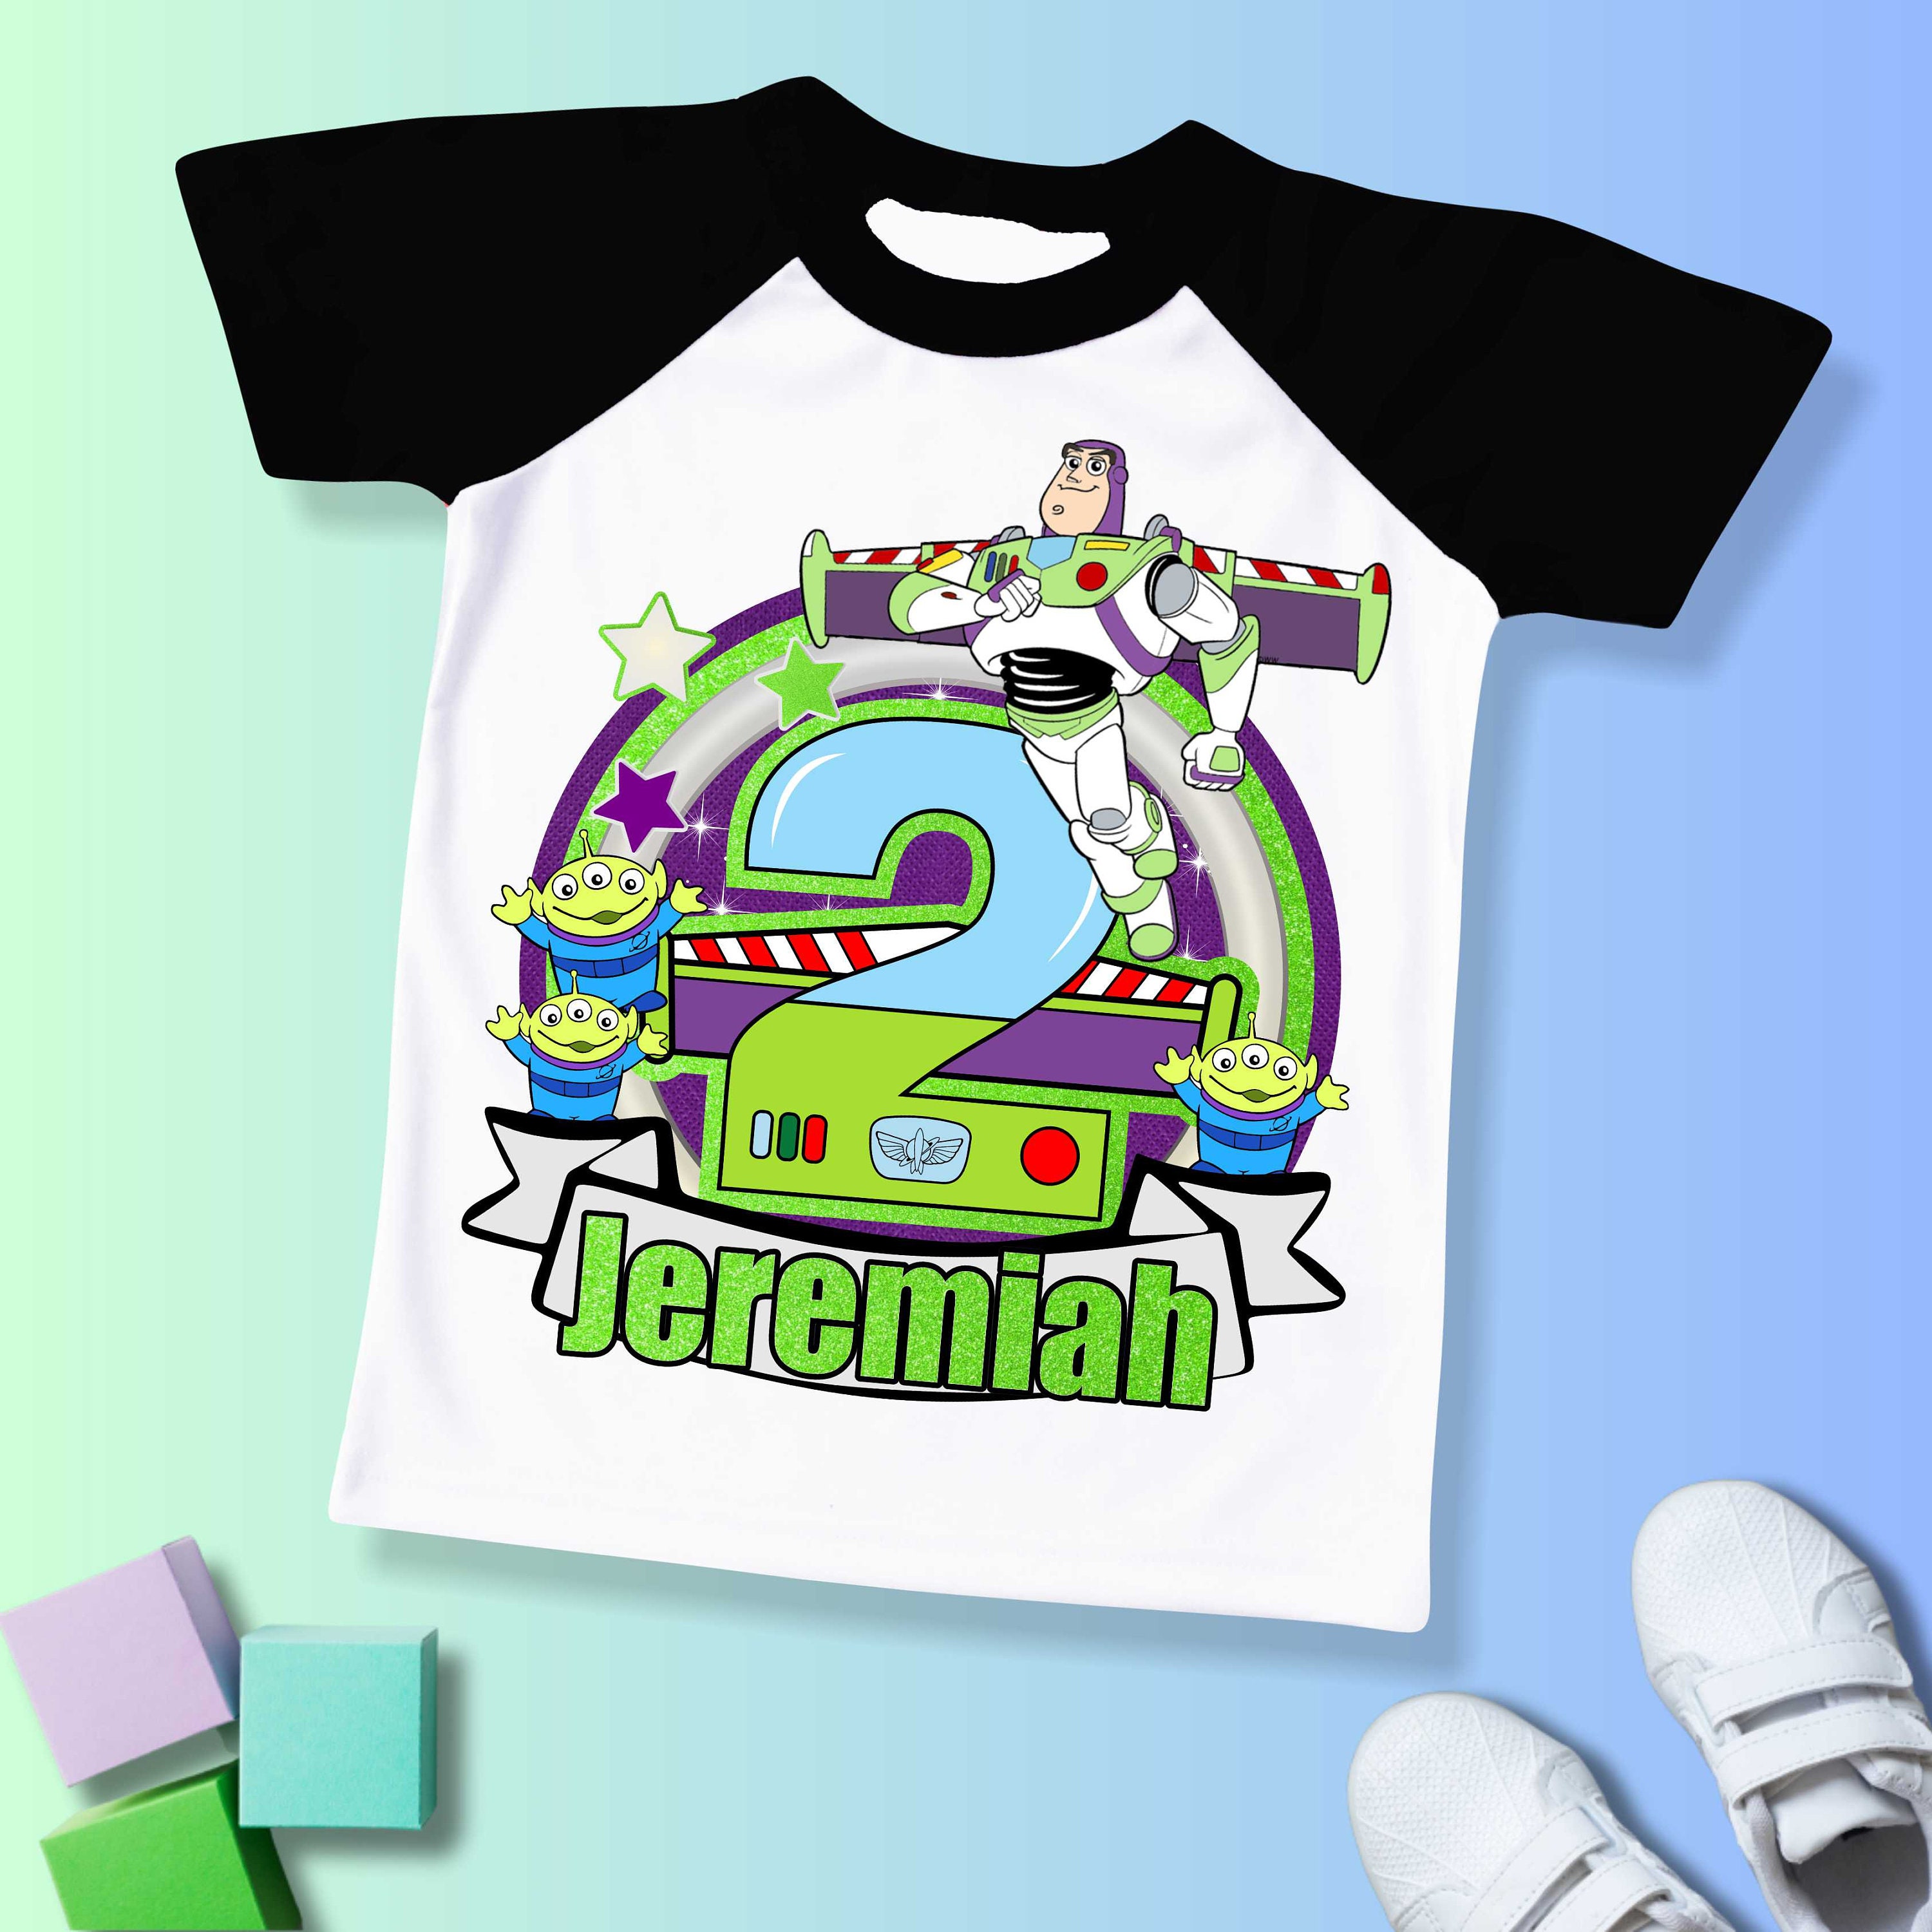 Discover Two Infinity  Birthday T Shirt,  theme Party, buzz lightyear Personalized shirt, Gift Birthday Shirt, family tees Custom